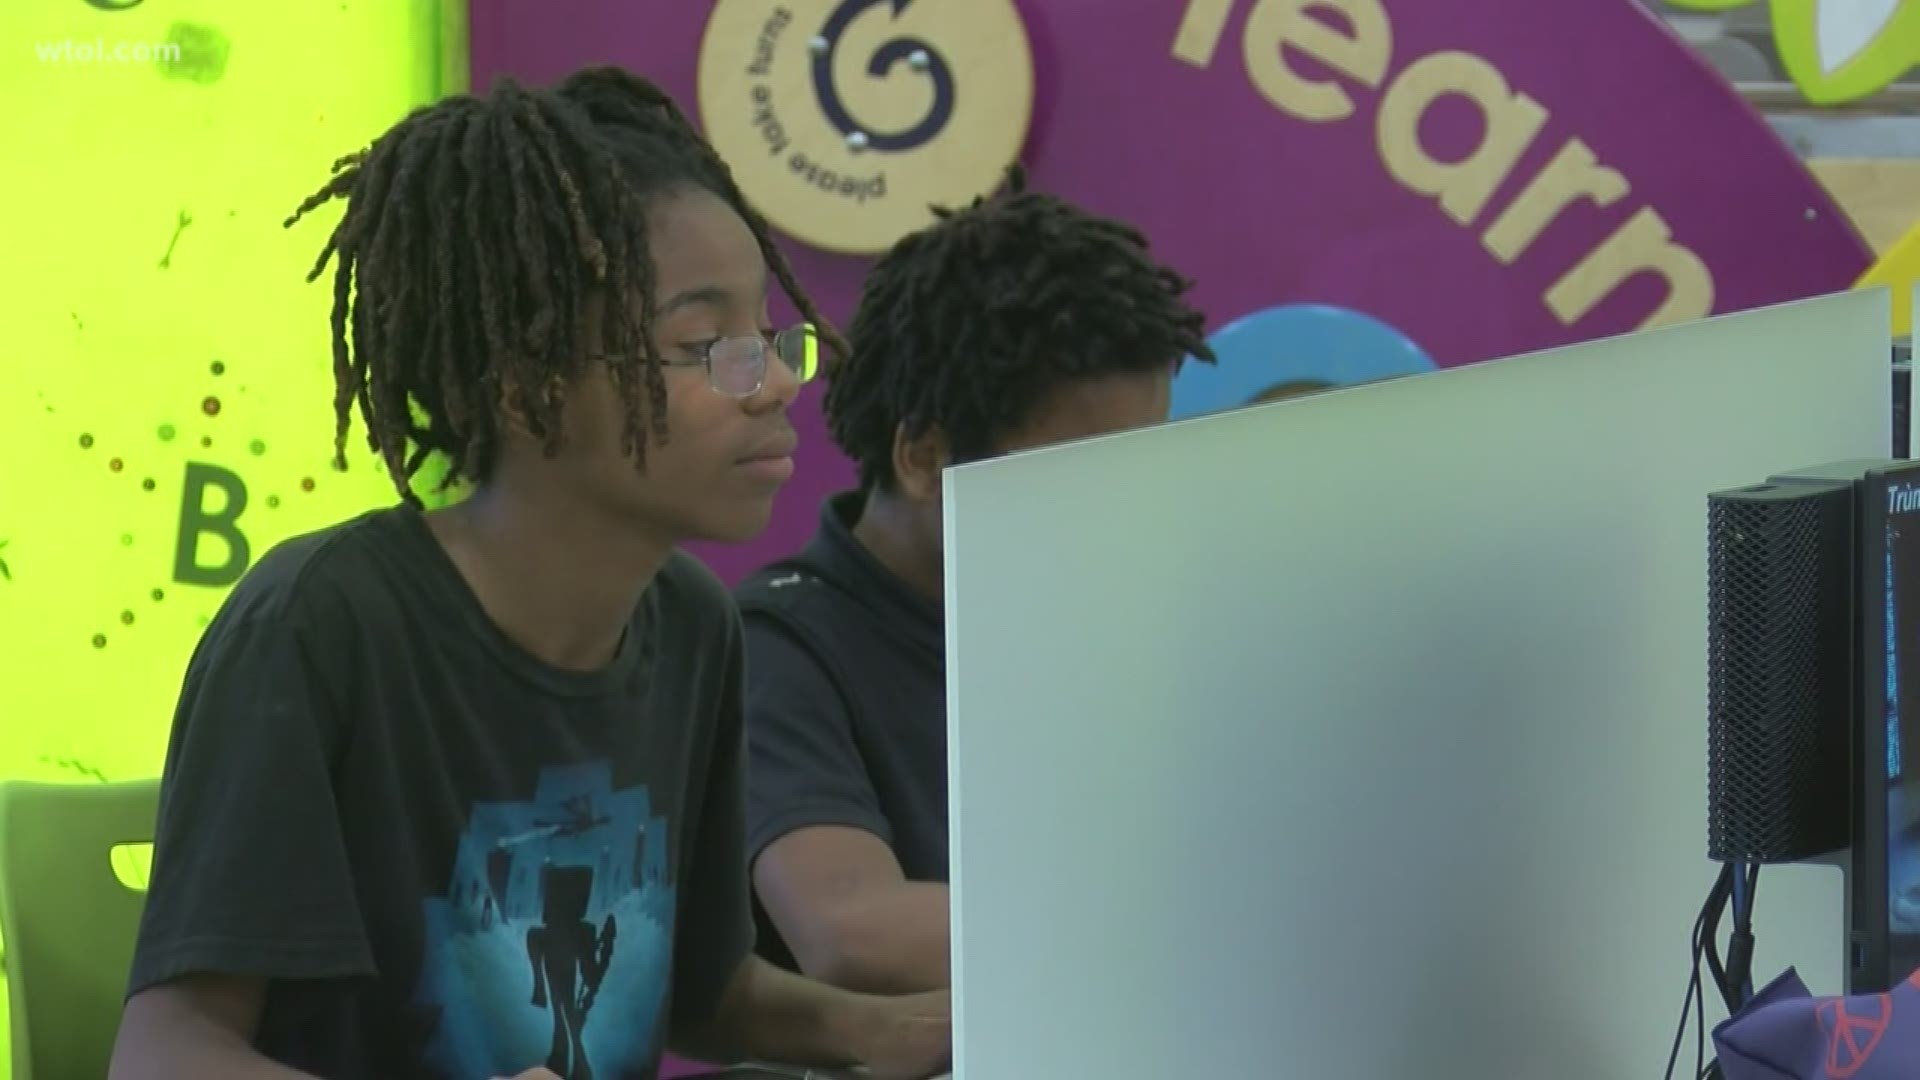 Toledo Lucas County Library coding courses prepare area youth for the future